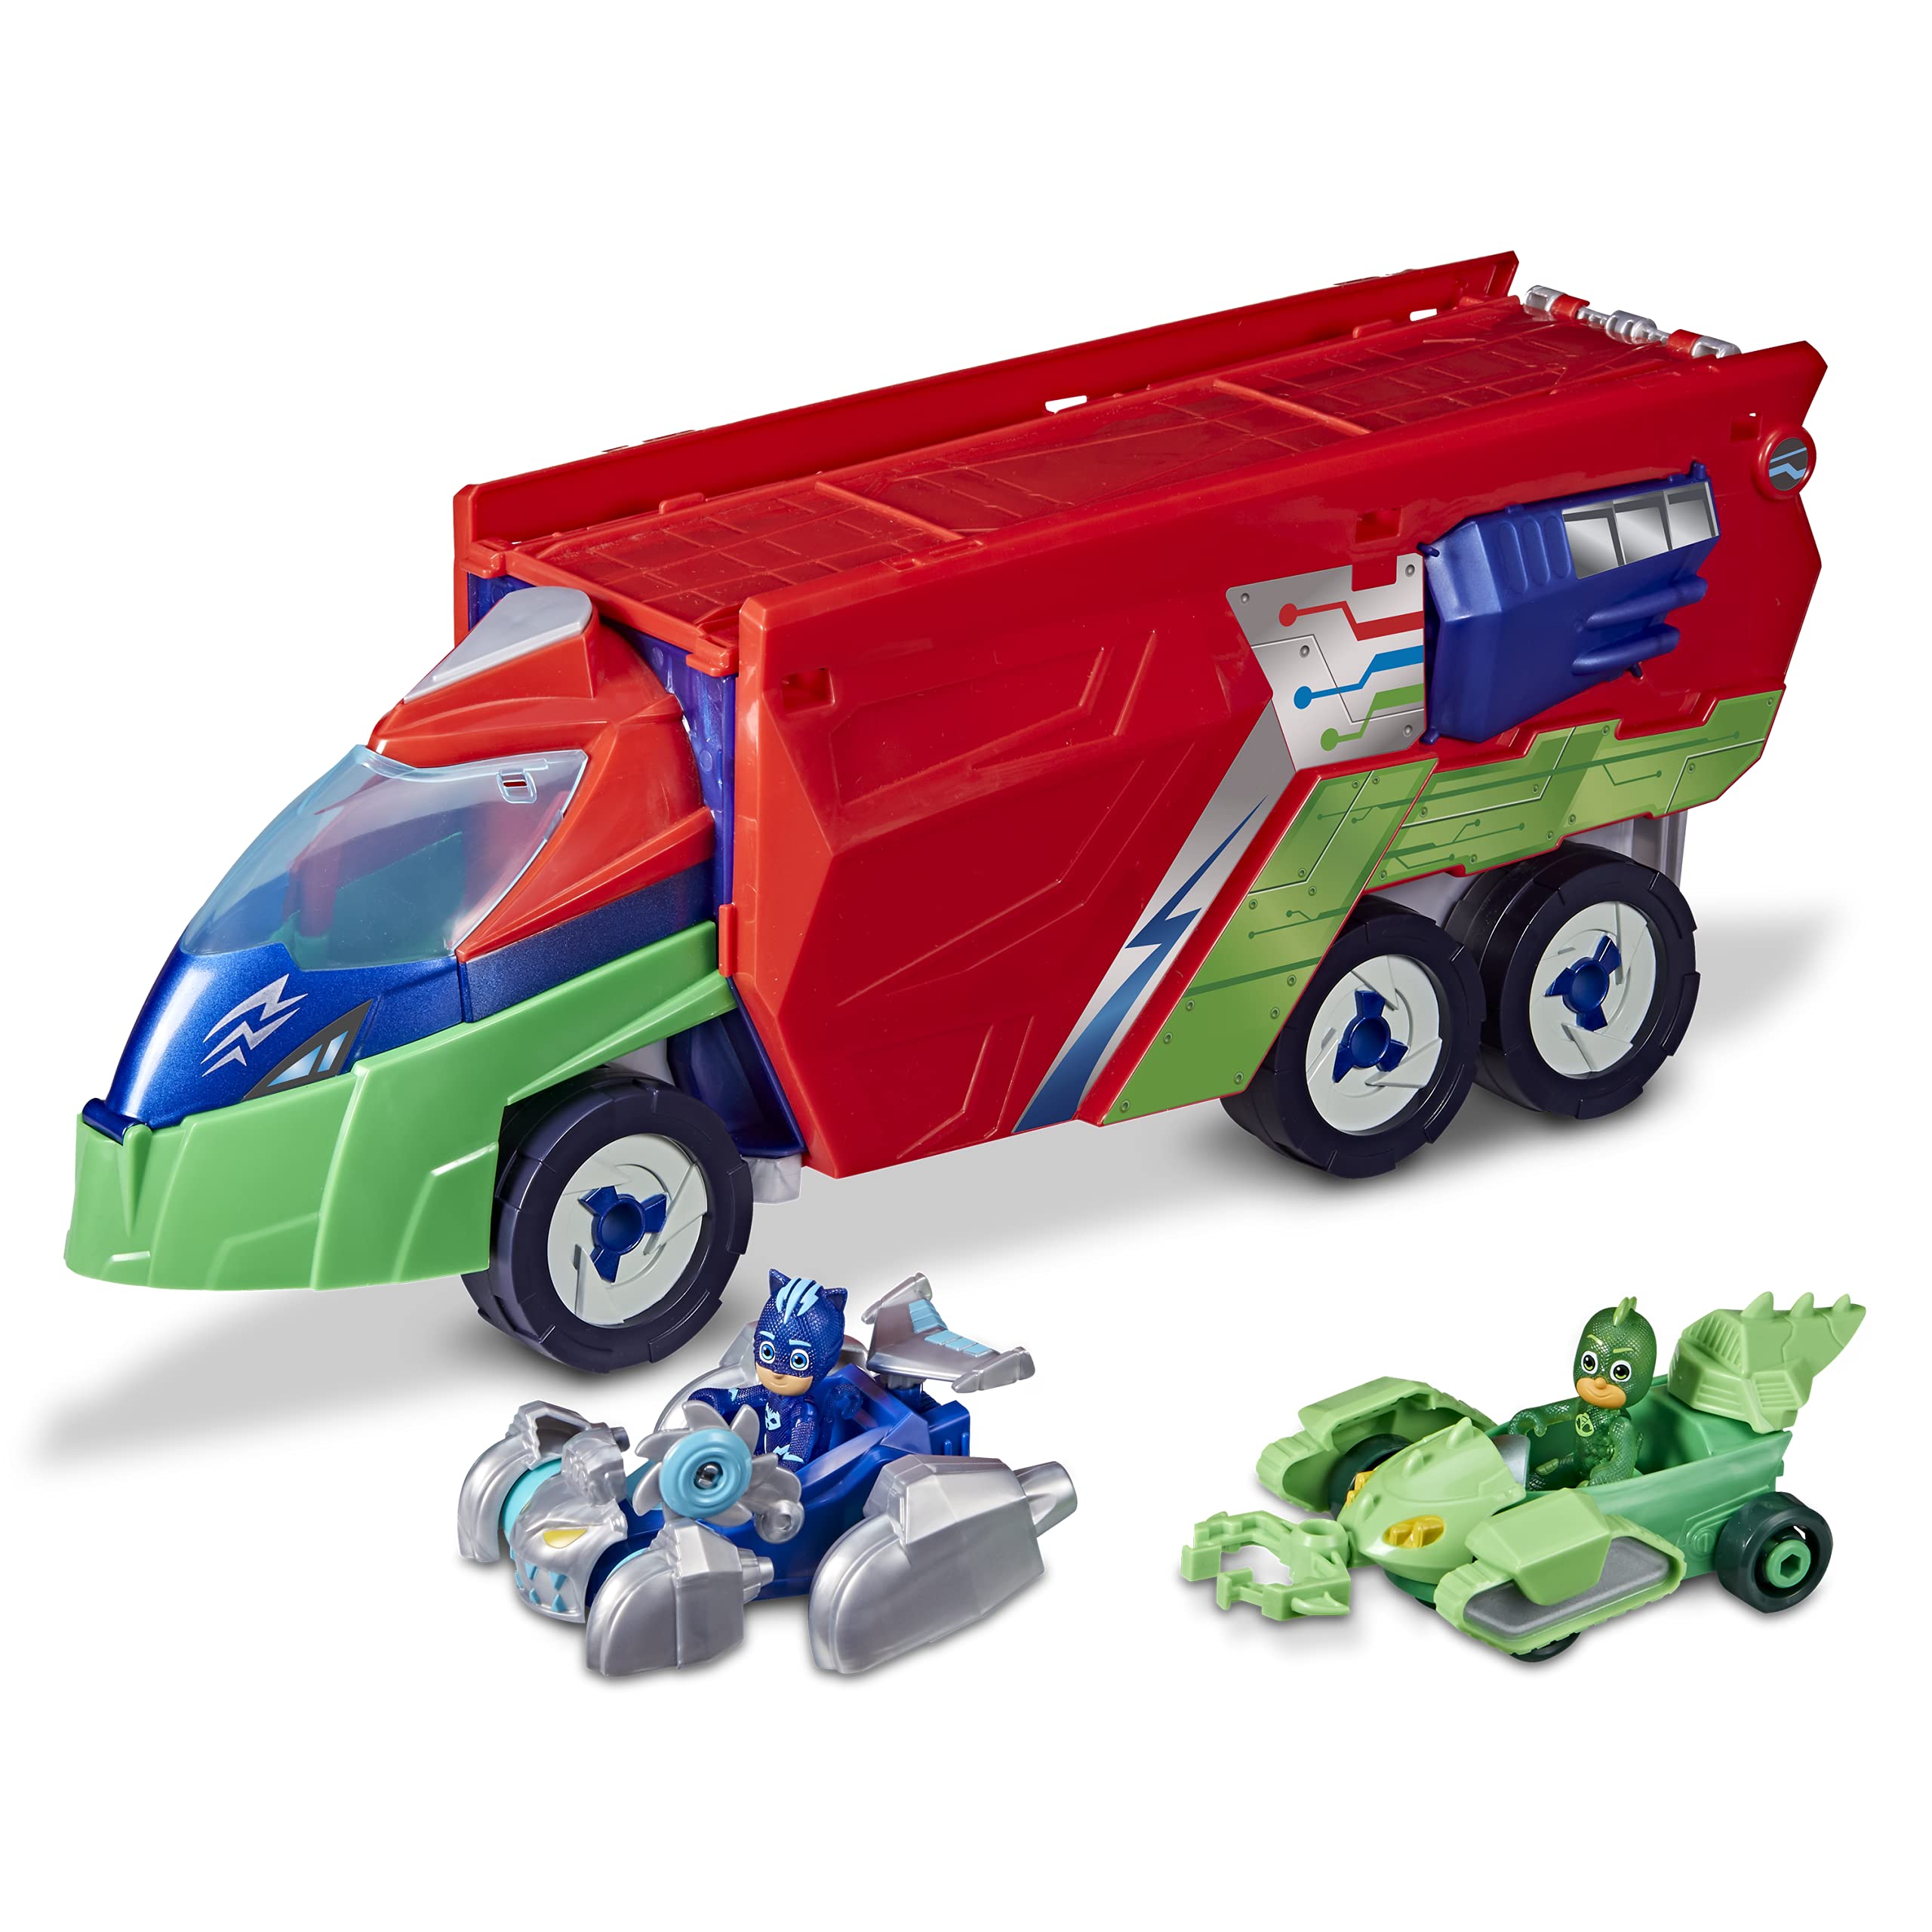 PJ Masks PJ Launching Seeker Preschool Toy, Transforming Vehicle Playset with 2 Cars, 2 Action Figures, and More, for Kids Ages 3 and Up